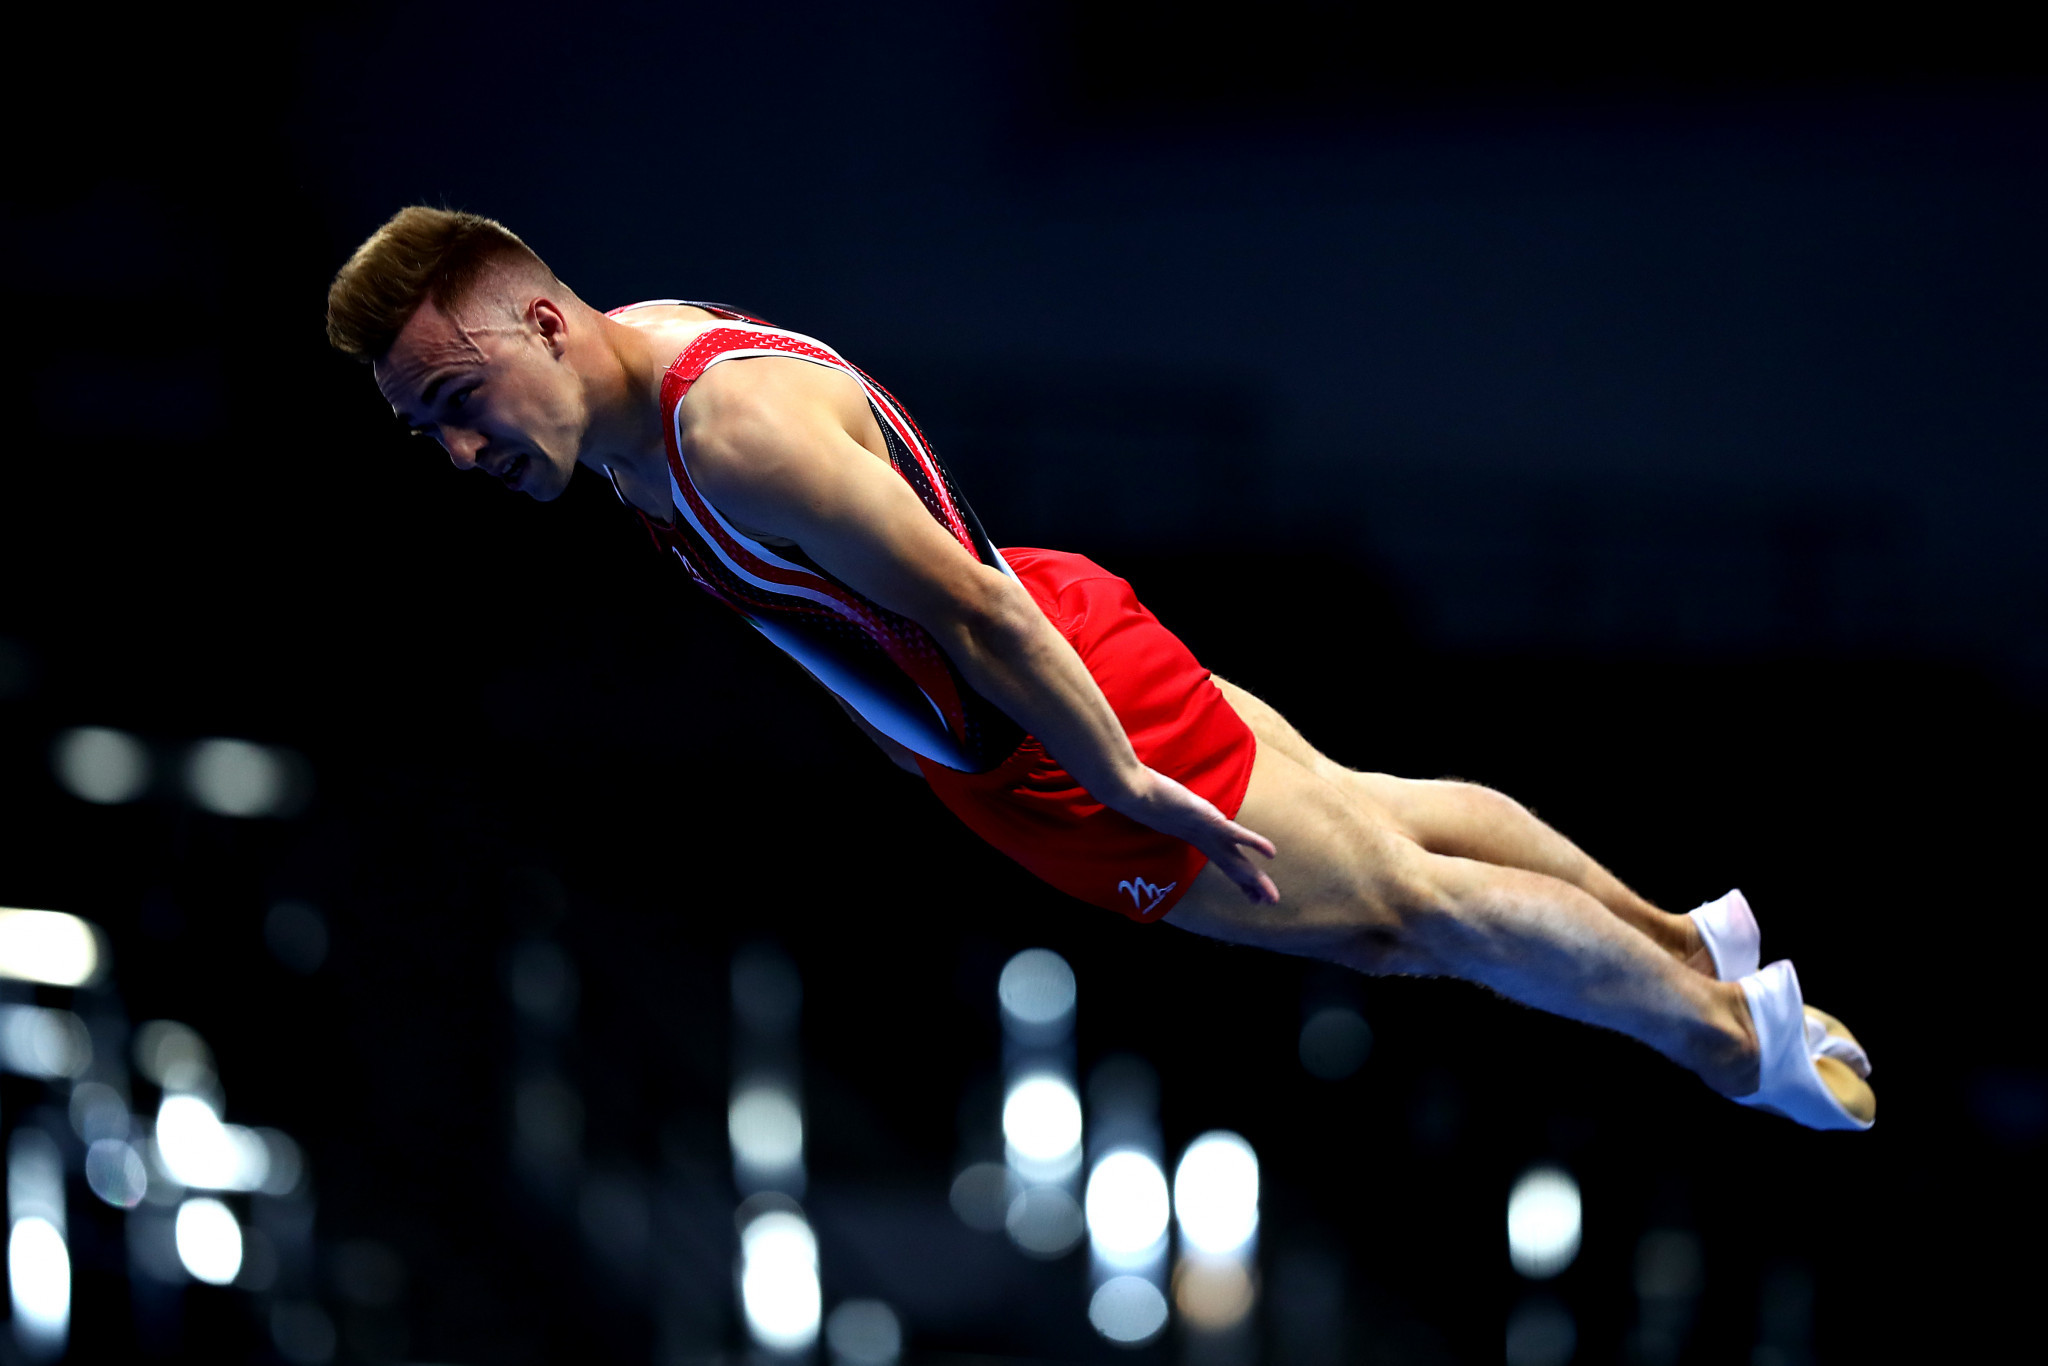 There was more success for Belarus in the trampoline gymnastics, with Rio 2016 Olympic champion Uladzislau Hancharou winning the men's individual event ©Getty Images